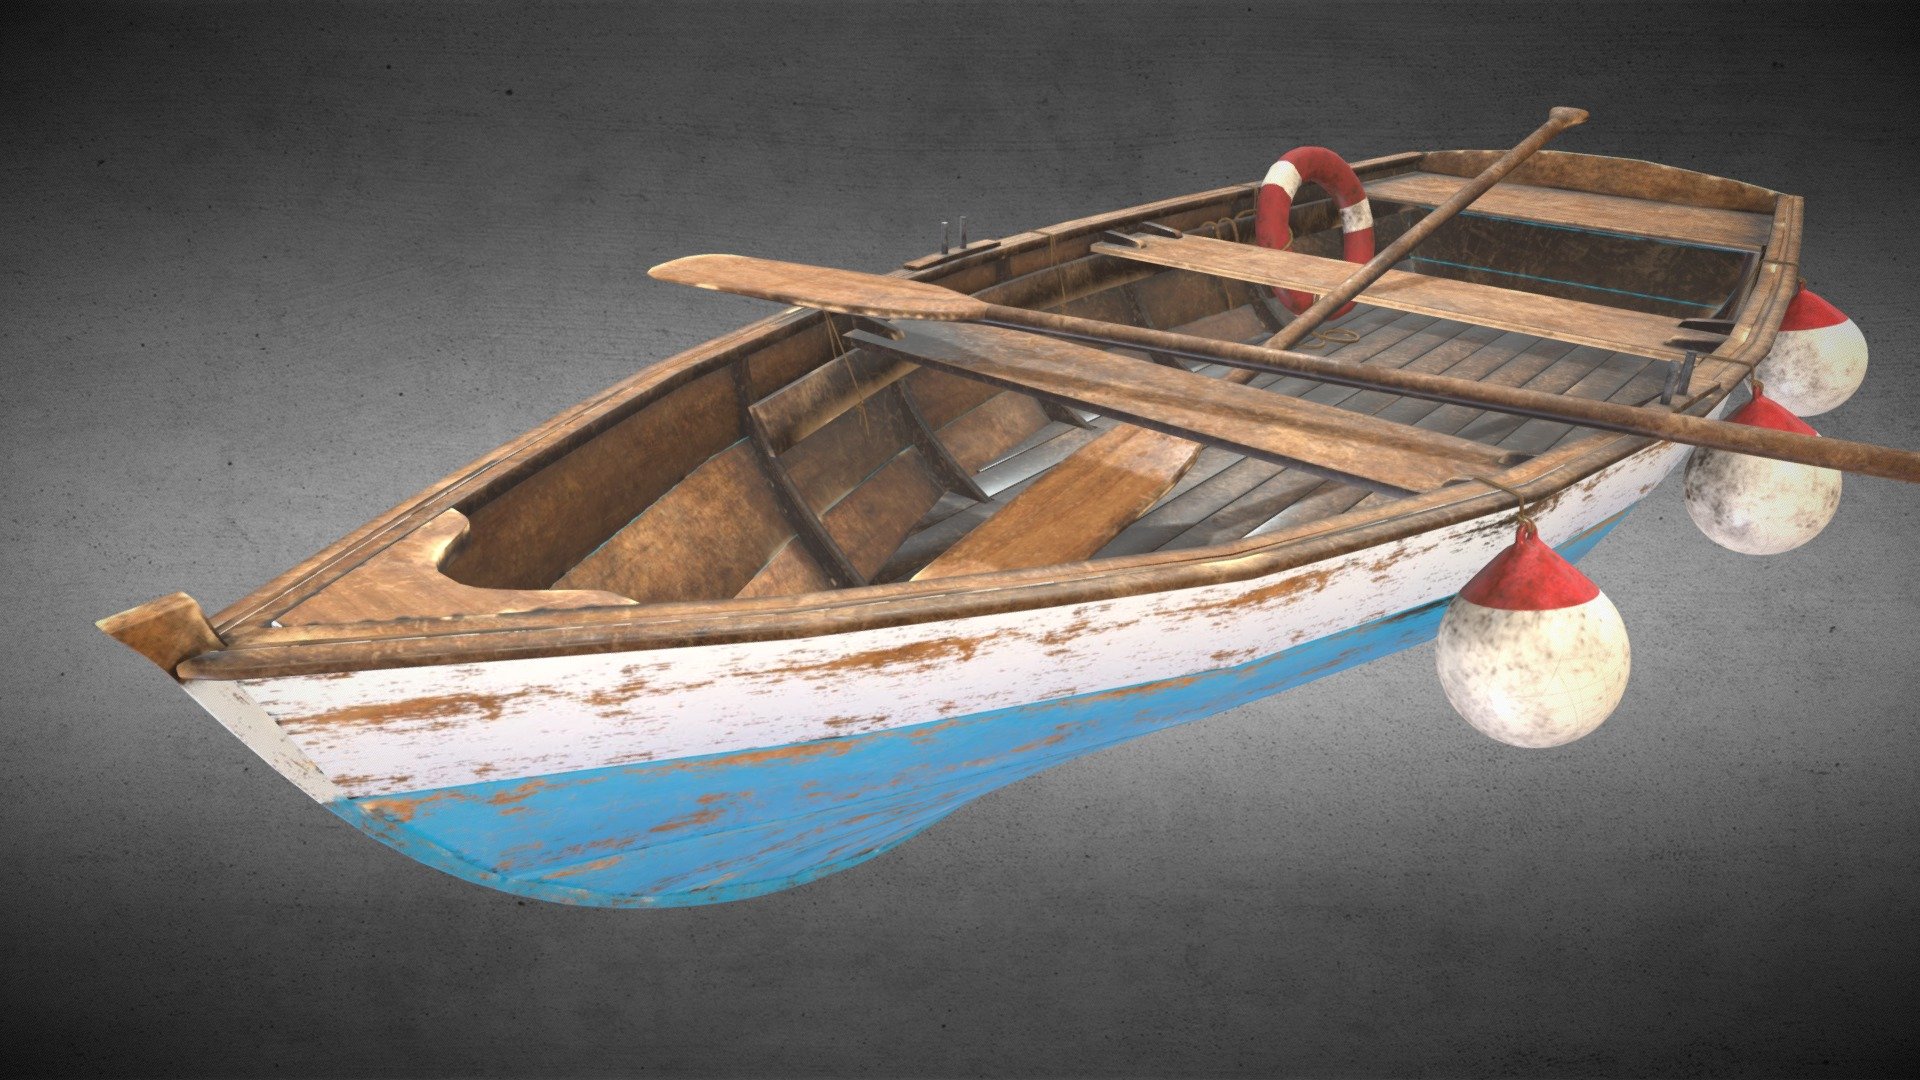 A wooden fishing boat with 6 buoys, a rescue ring and 2 paddles.
this boat was modeled in 3ds max and texture in substance painter.
this project was inspired by a tutorial of the creative Polyrendr:
https://www.youtube.com/watch?v=Tjl9bPoP9LM&amp;list=PLOpIH1V5cPIxN6WefGalztQdW3MBCHV5z&amp;index=19&amp;t=2847s&amp;ab_channel=Polyrendr - Wooden fishing boat - Buy Royalty Free 3D model by mili.aiesecer 3d model